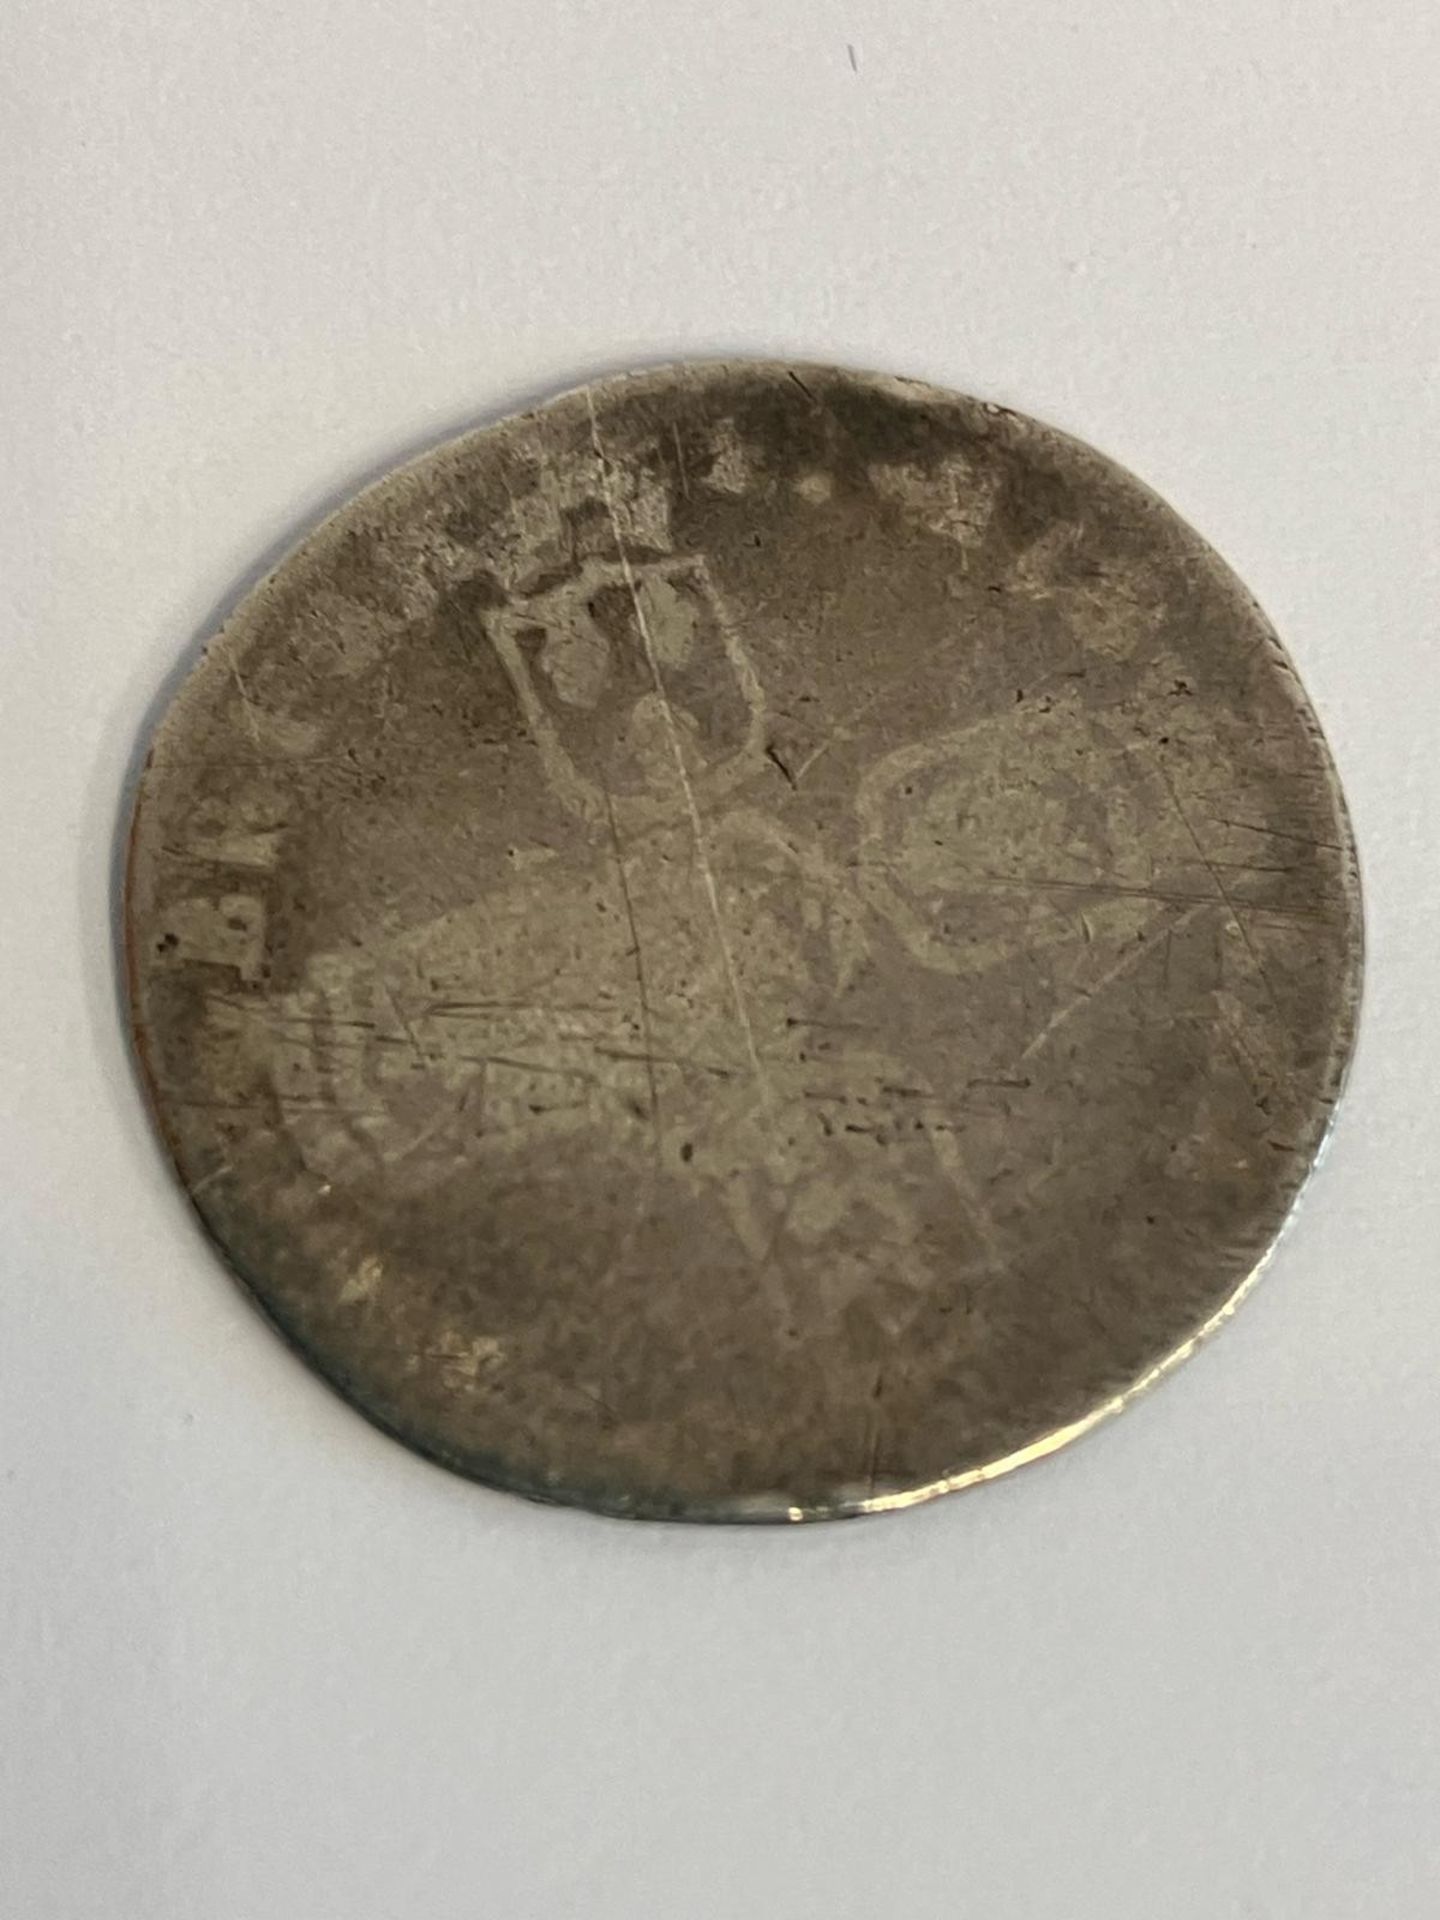 William III (William of Orange ruled 1689 - 1702) SILVER SIXPENCE in worn/poor condition. - Image 2 of 2